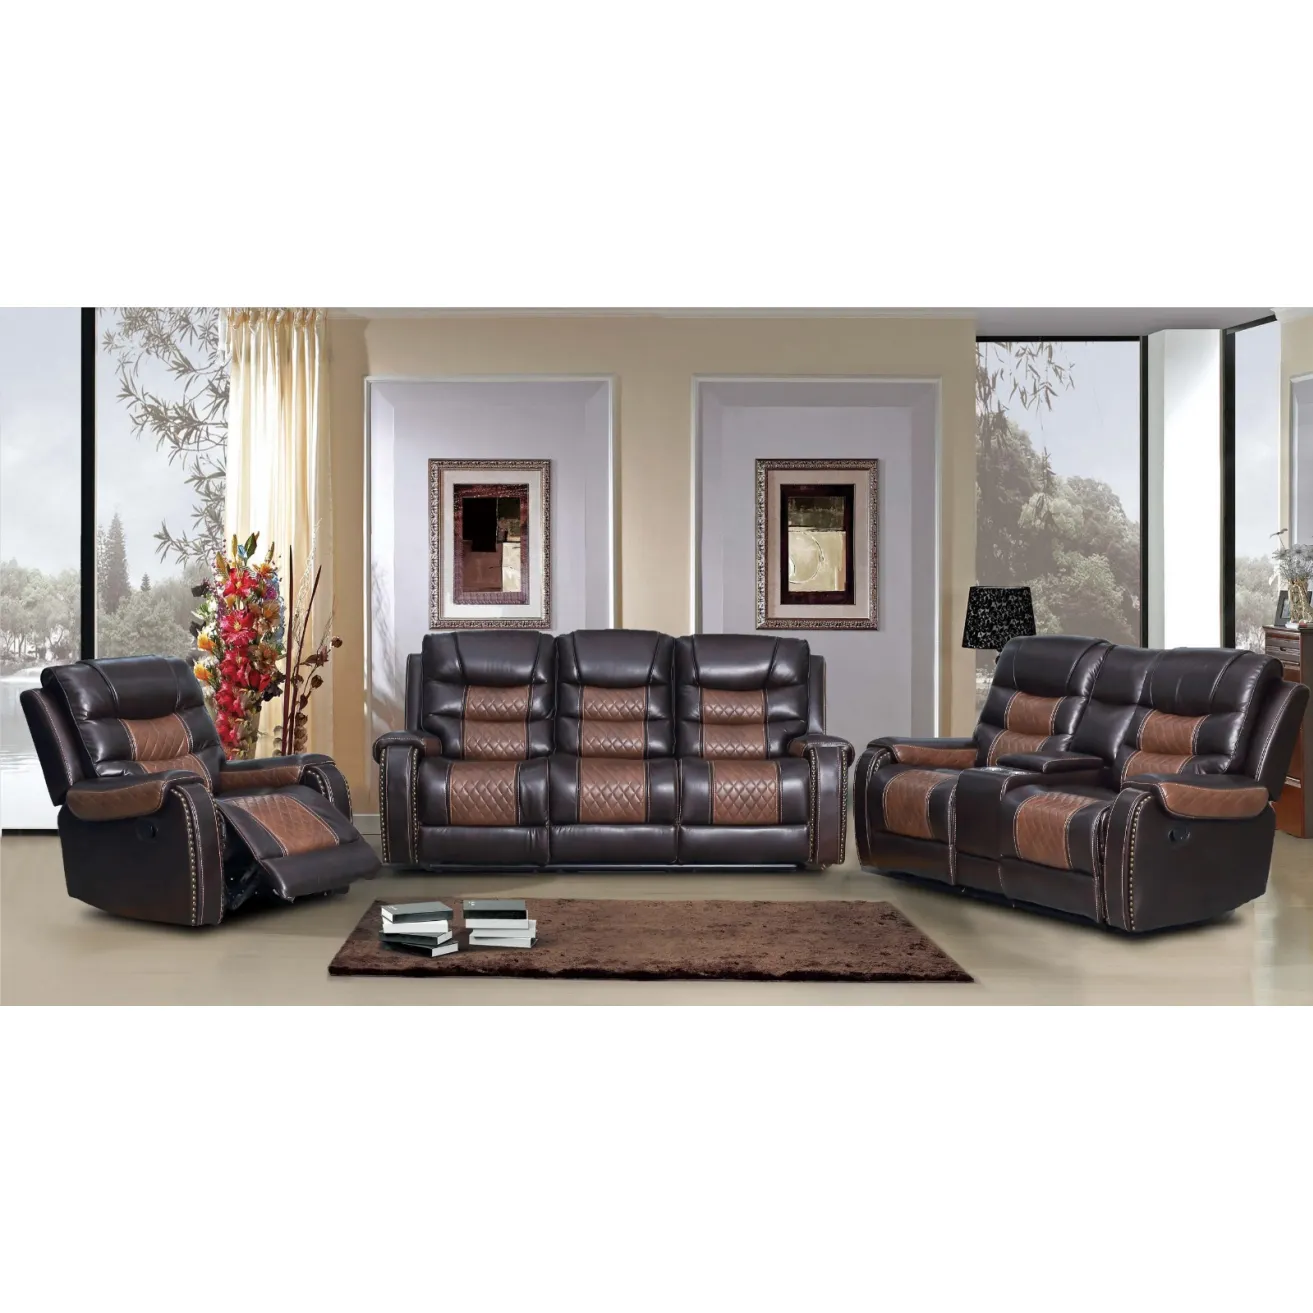 Modern Style Living Room Furniture Air Leather Living Room Chesterfield Sofas